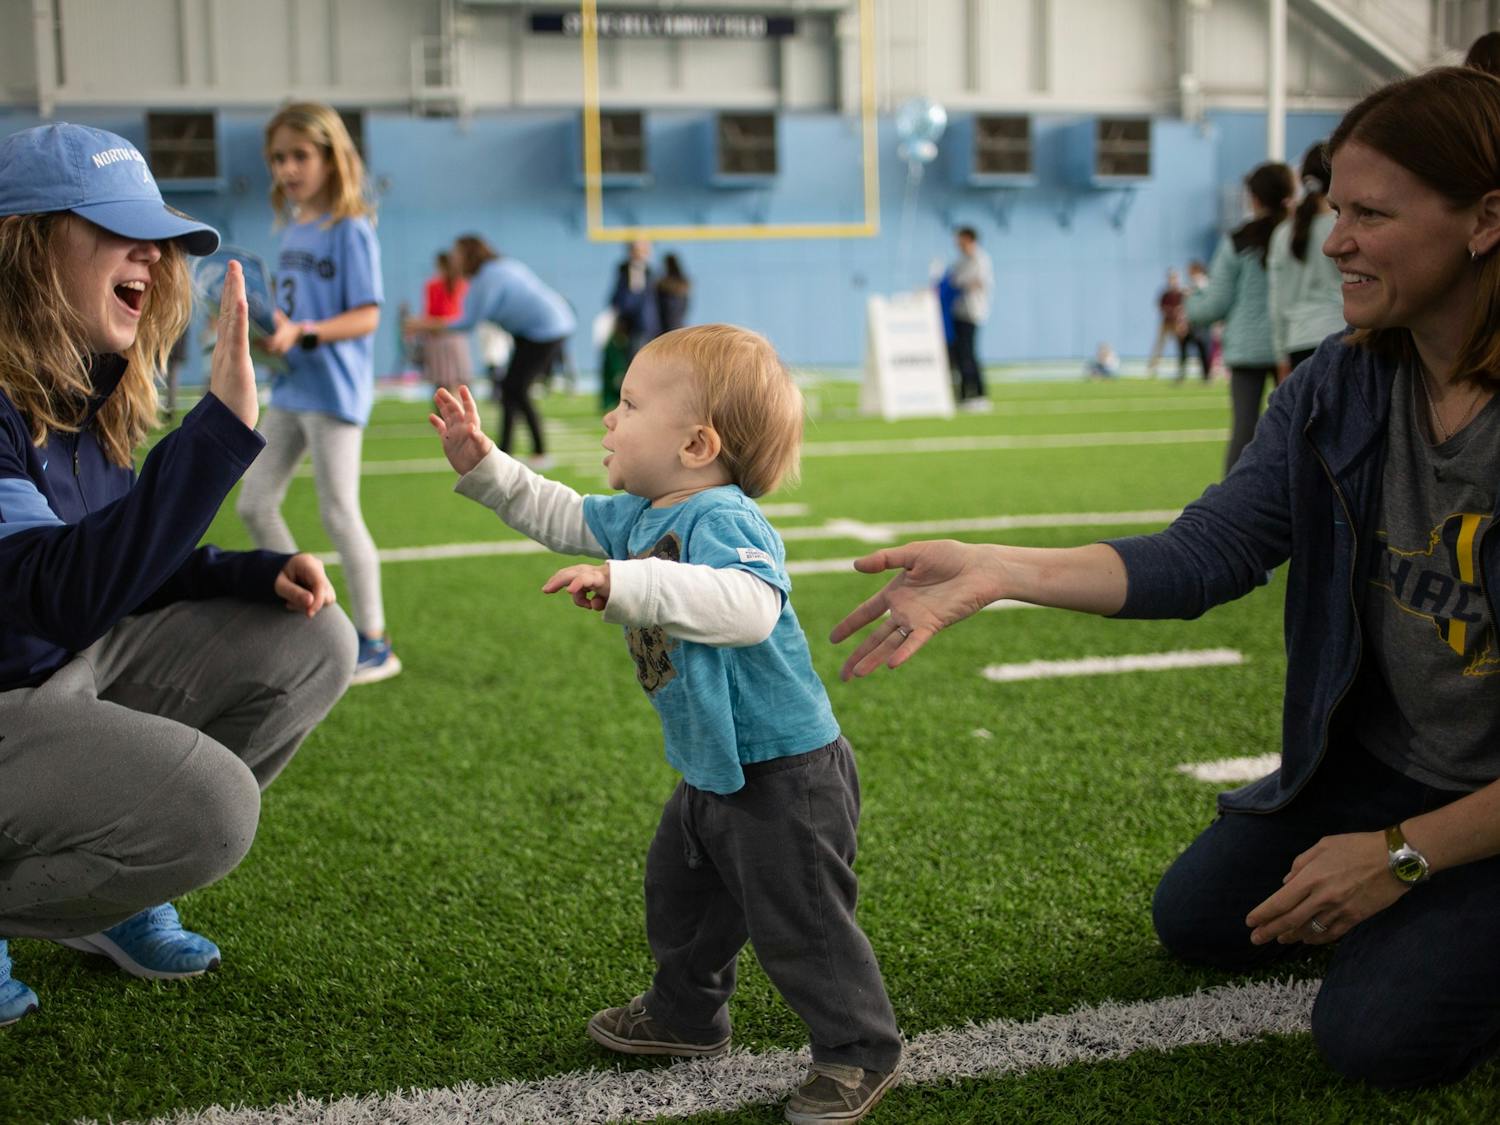 On Sunday, over 1200 people came to UNC's indoor practice facility to participate in National Girls and Women in Sports Day, with all 15 women's varsity teams hosting mini-clinics to allow participants from pre-k through 8th grade to try out new sports.&nbsp;